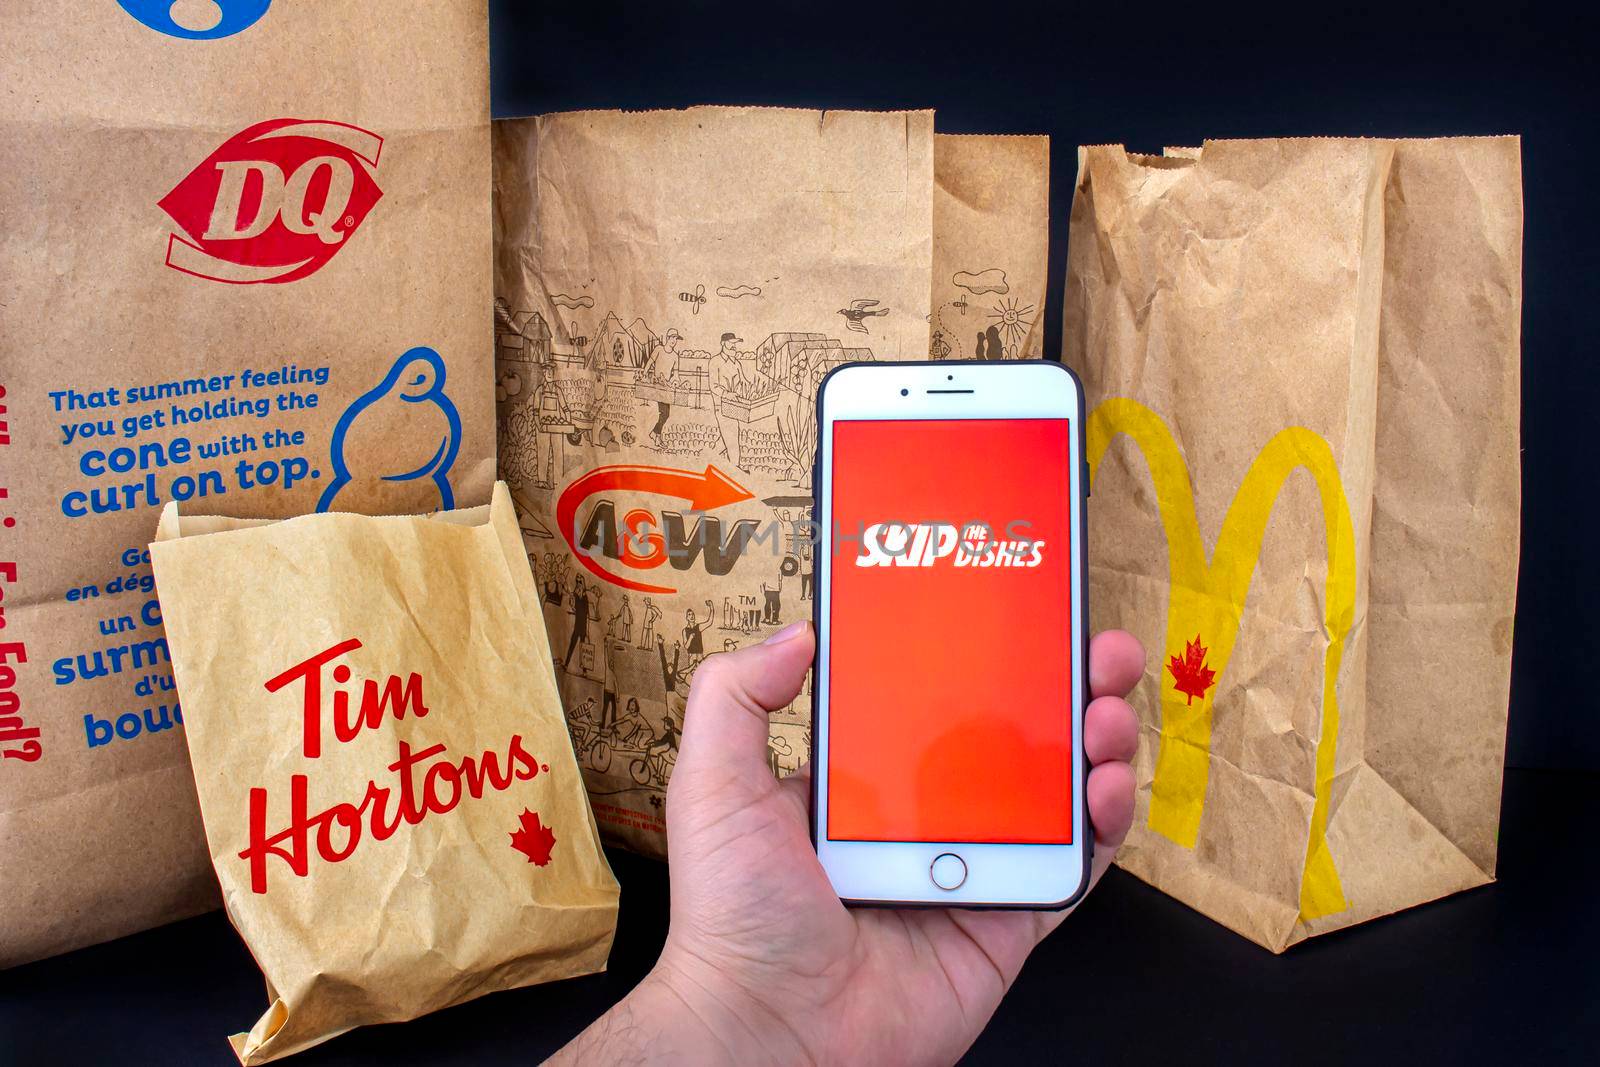 Calgary, Alberta. Canada. April 24, 2020: A person holding an iPhone Plus with the Skip the dishes application open with delivered food bags from Tim Hourtons, A&W, McDonals and DQ by oasisamuel